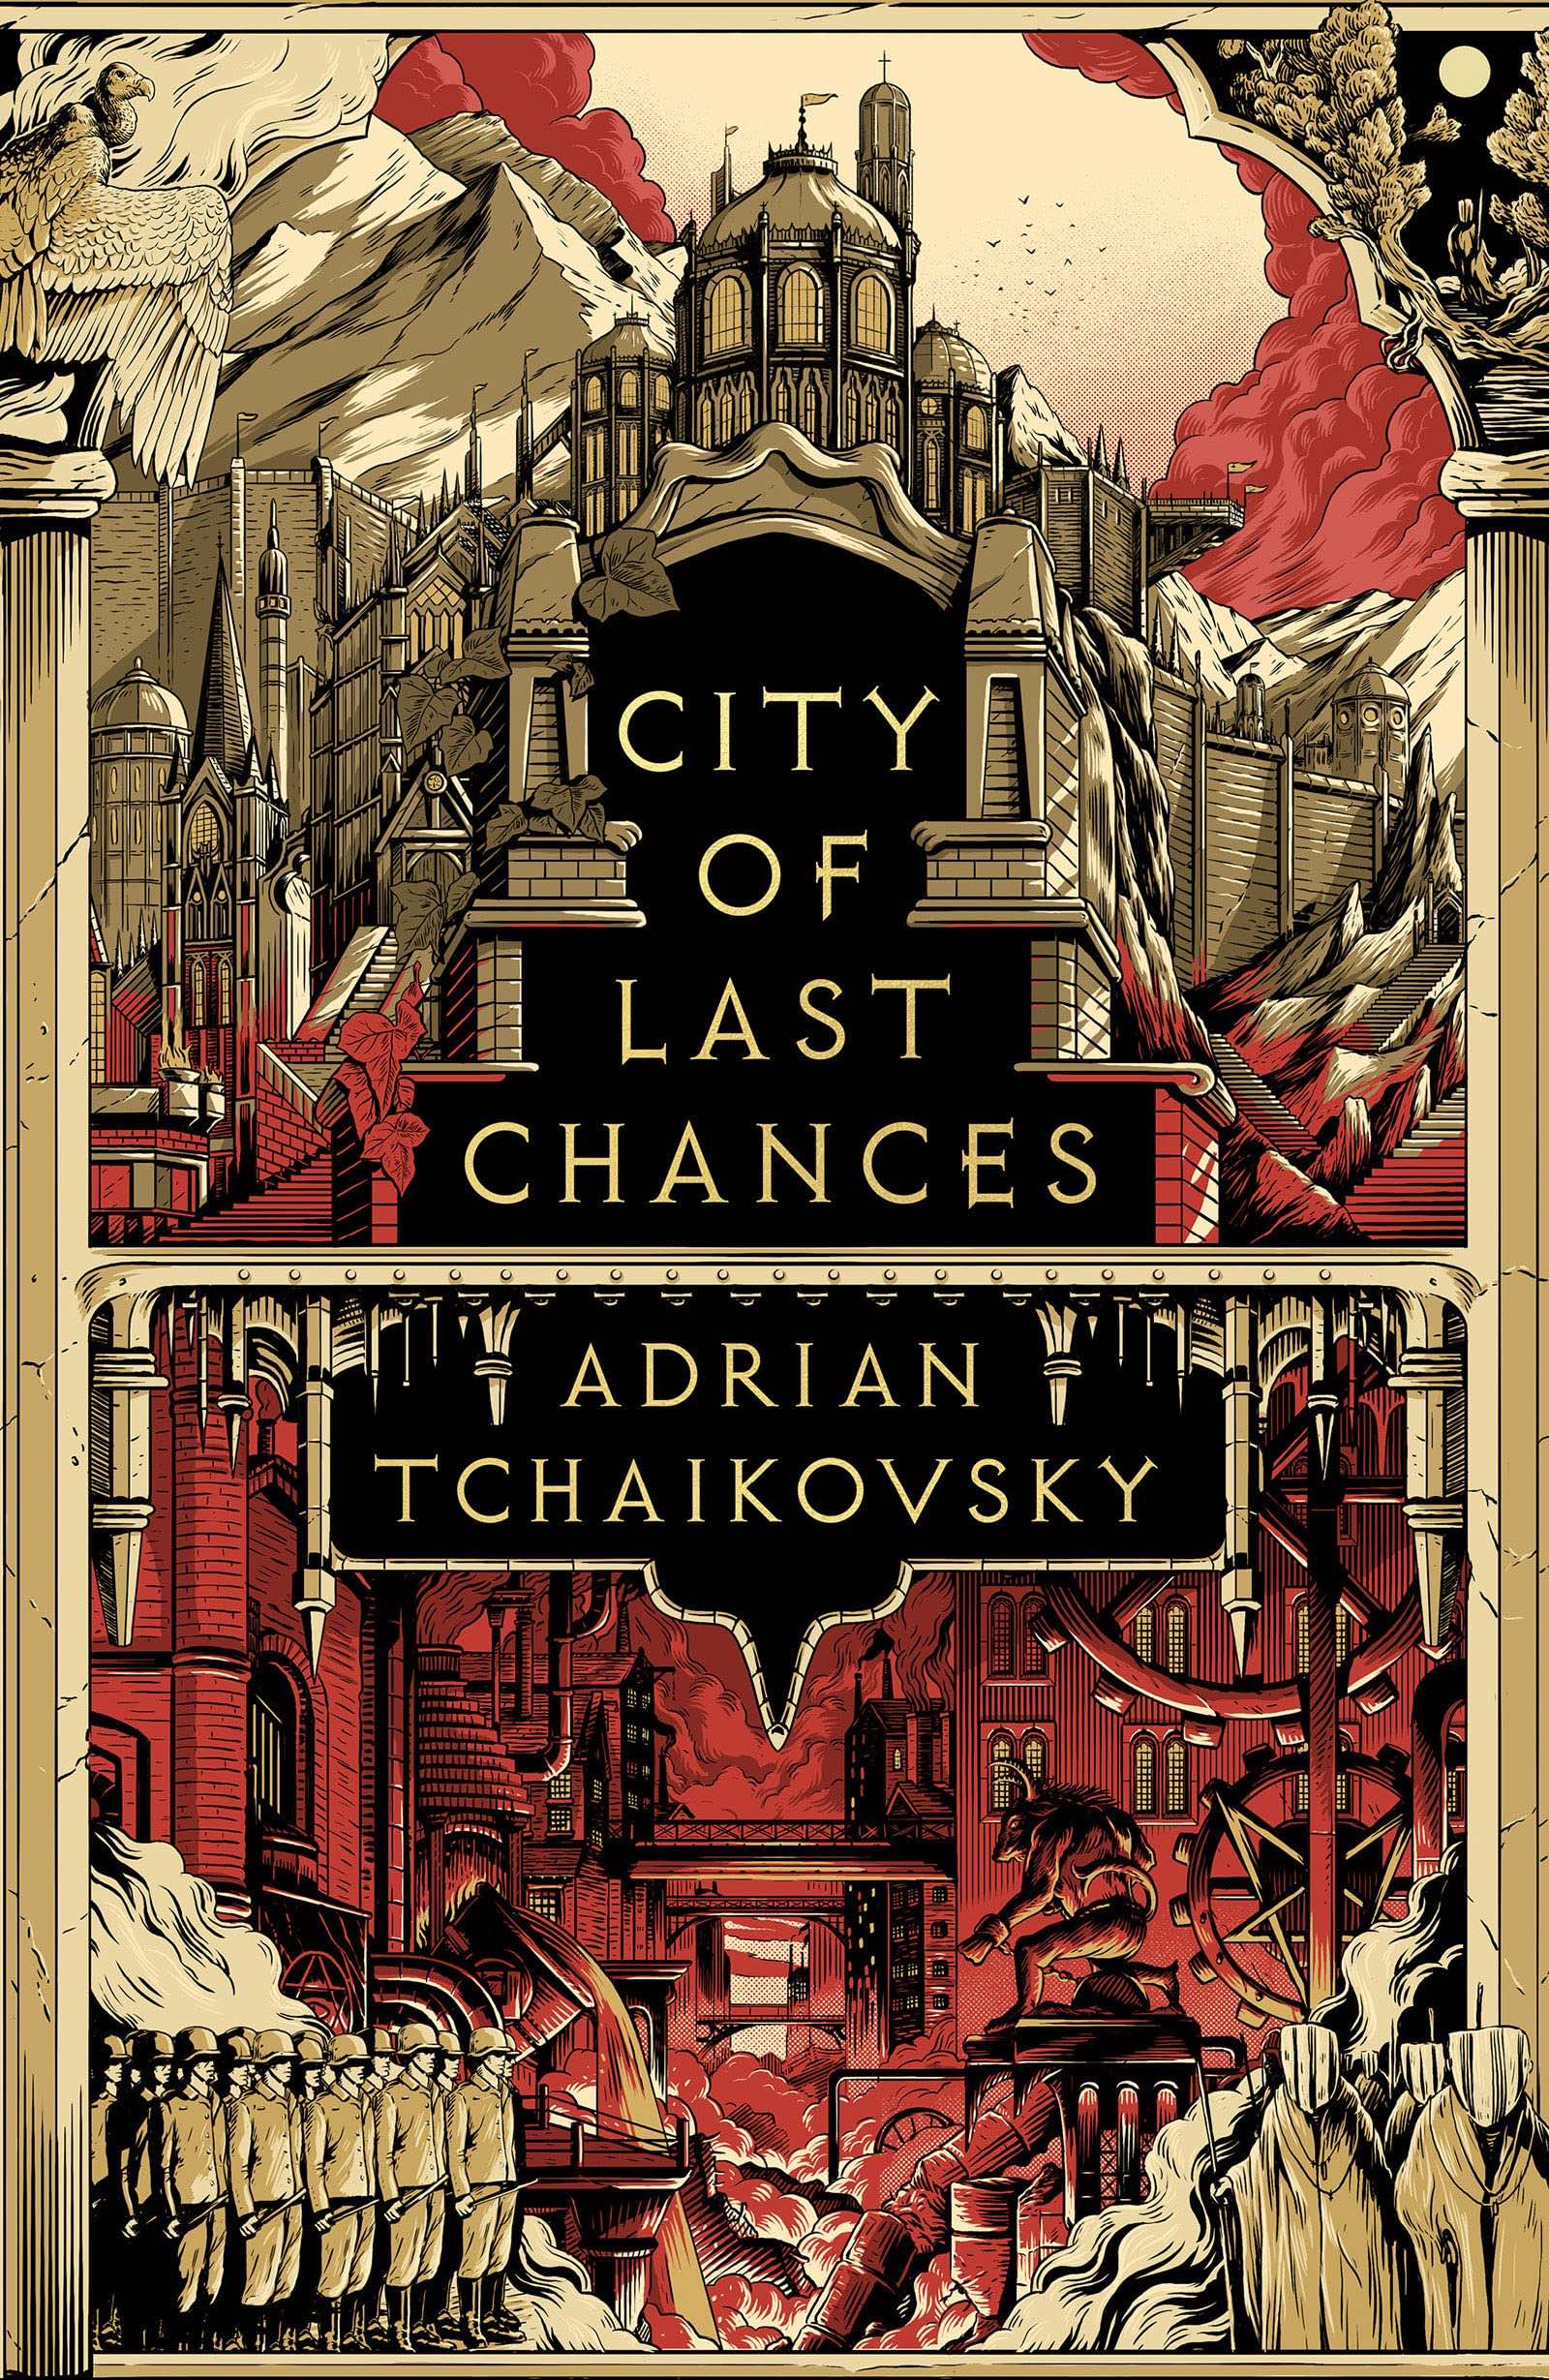 by　Buy　Tchaikovsky　Last　City　bookstore　online　of　from　Aotearoa　Chances　Adrian　Parallel